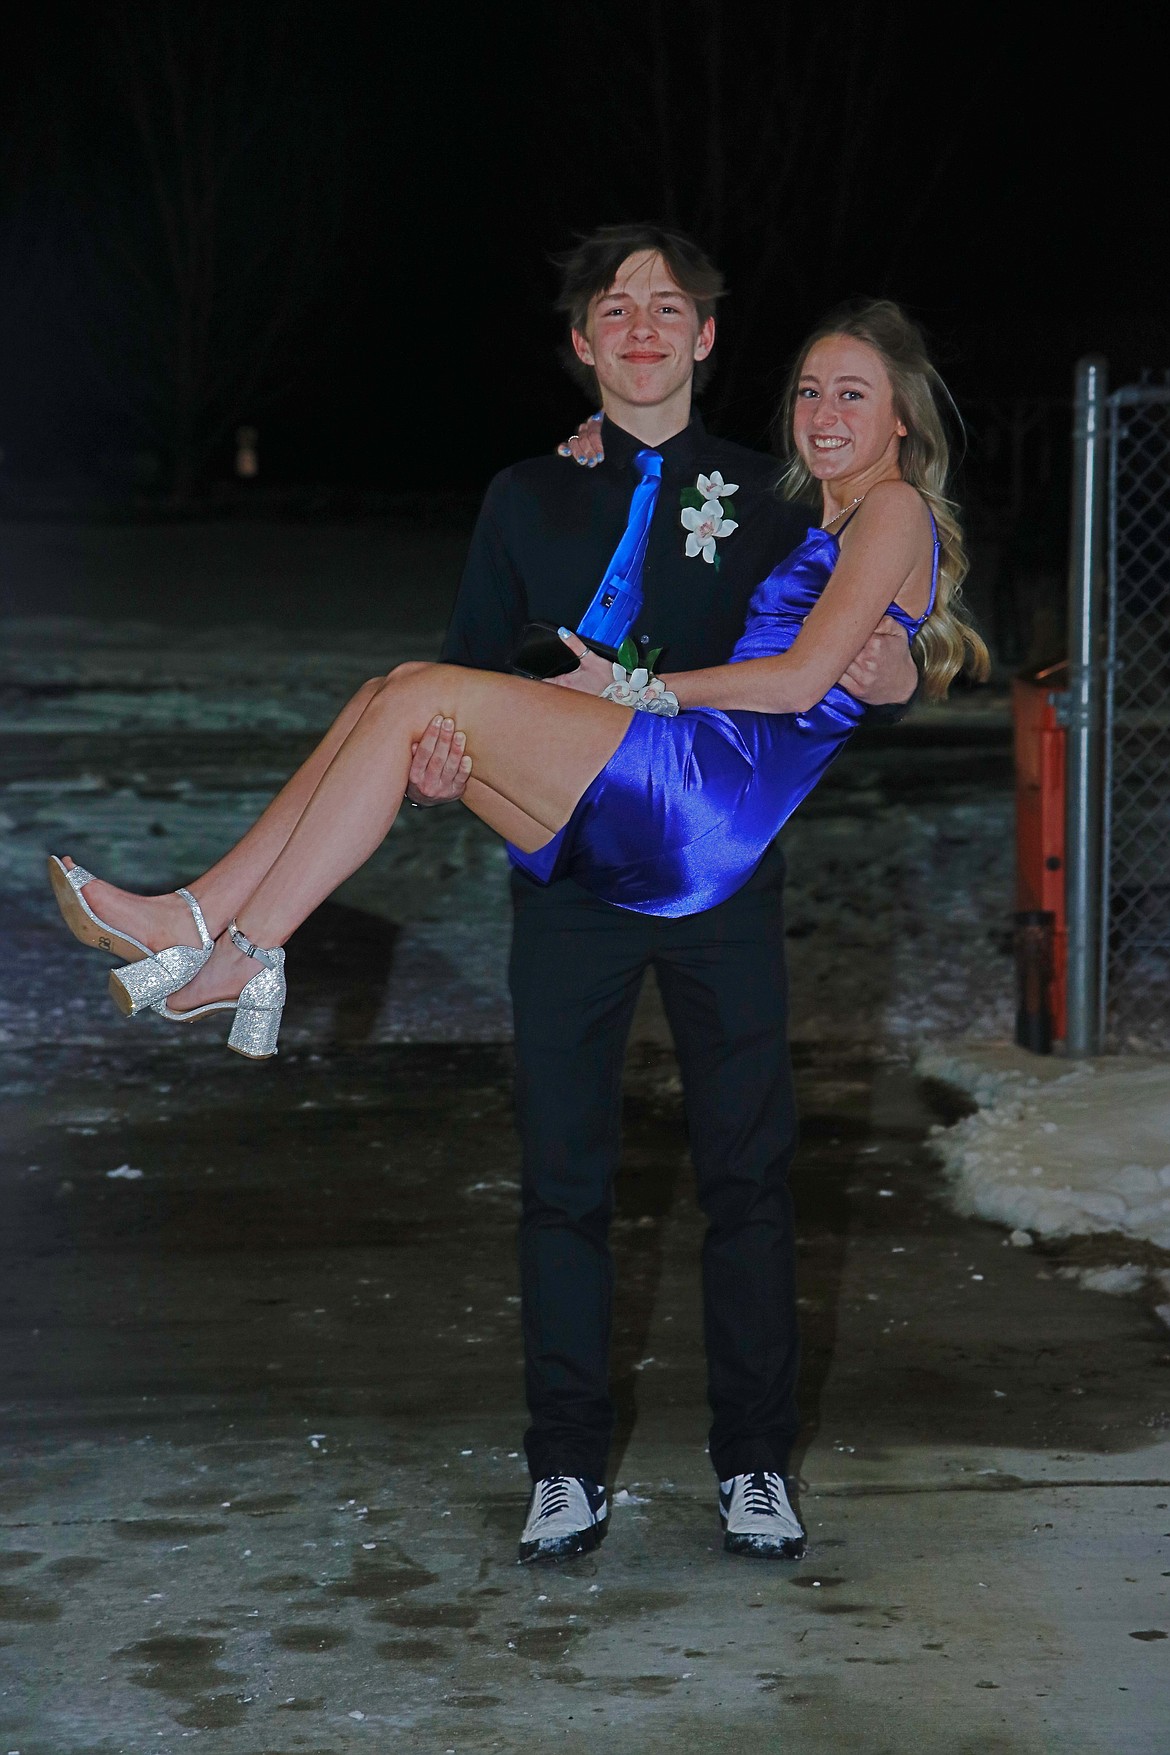 Keeping his date's shoes out of the snow, Shawn O'Keefe carries Kallen Burrows to the Plains High School prom. (Jessica Peterson photo(